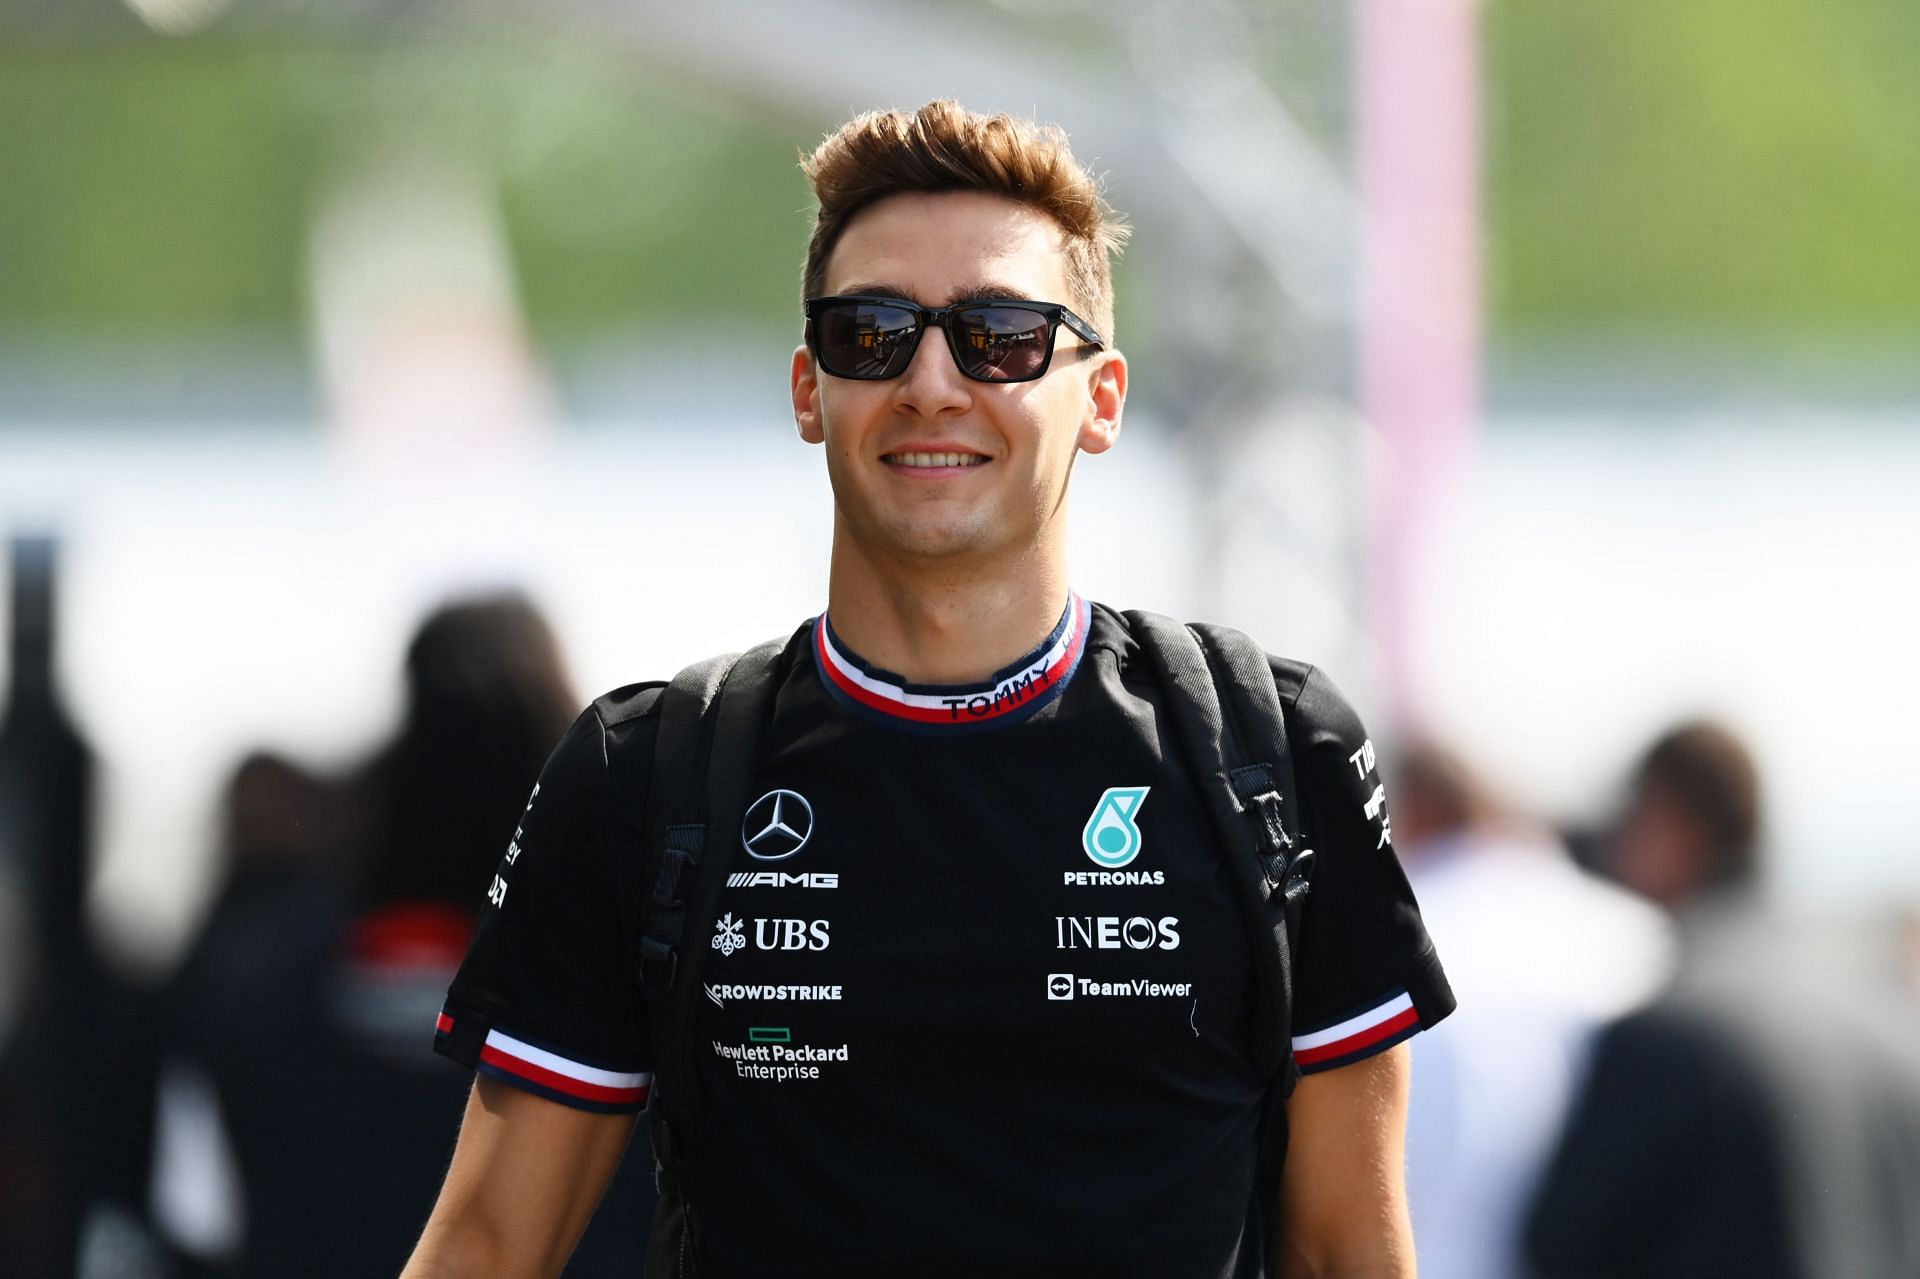 George Russell walks in the Paddock before practice ahead of the F1 Grand Prix of Emilia Romagna (Photo by Dan Mullan/Getty Images)